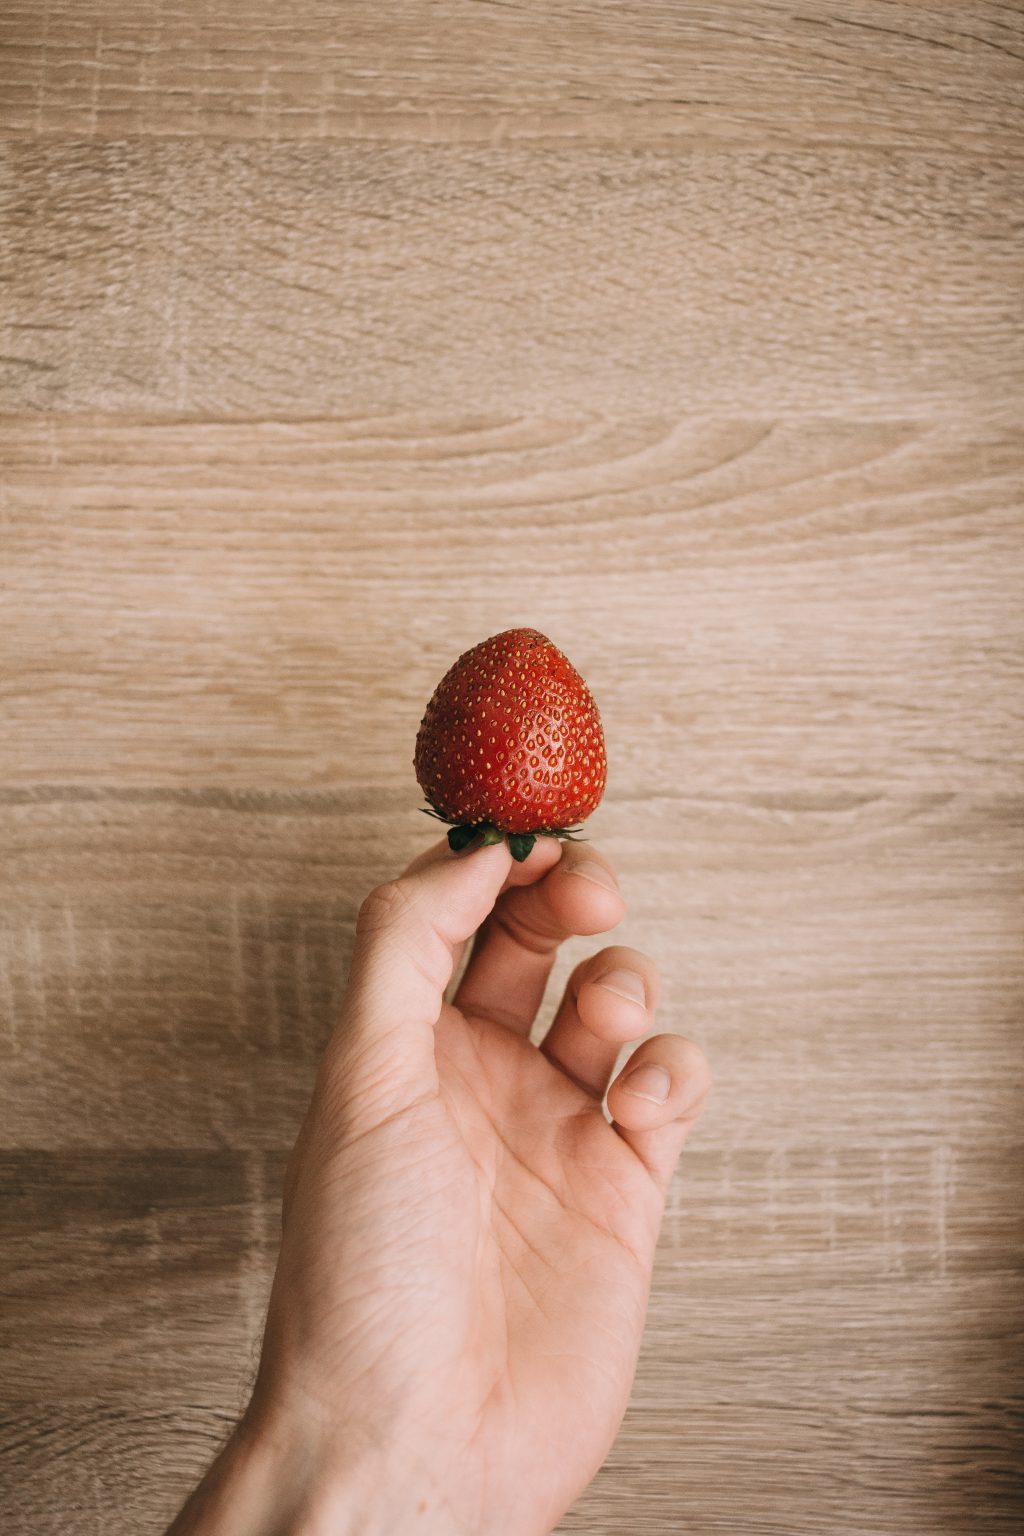 Strawberry in a male hand 2 - free stock photo